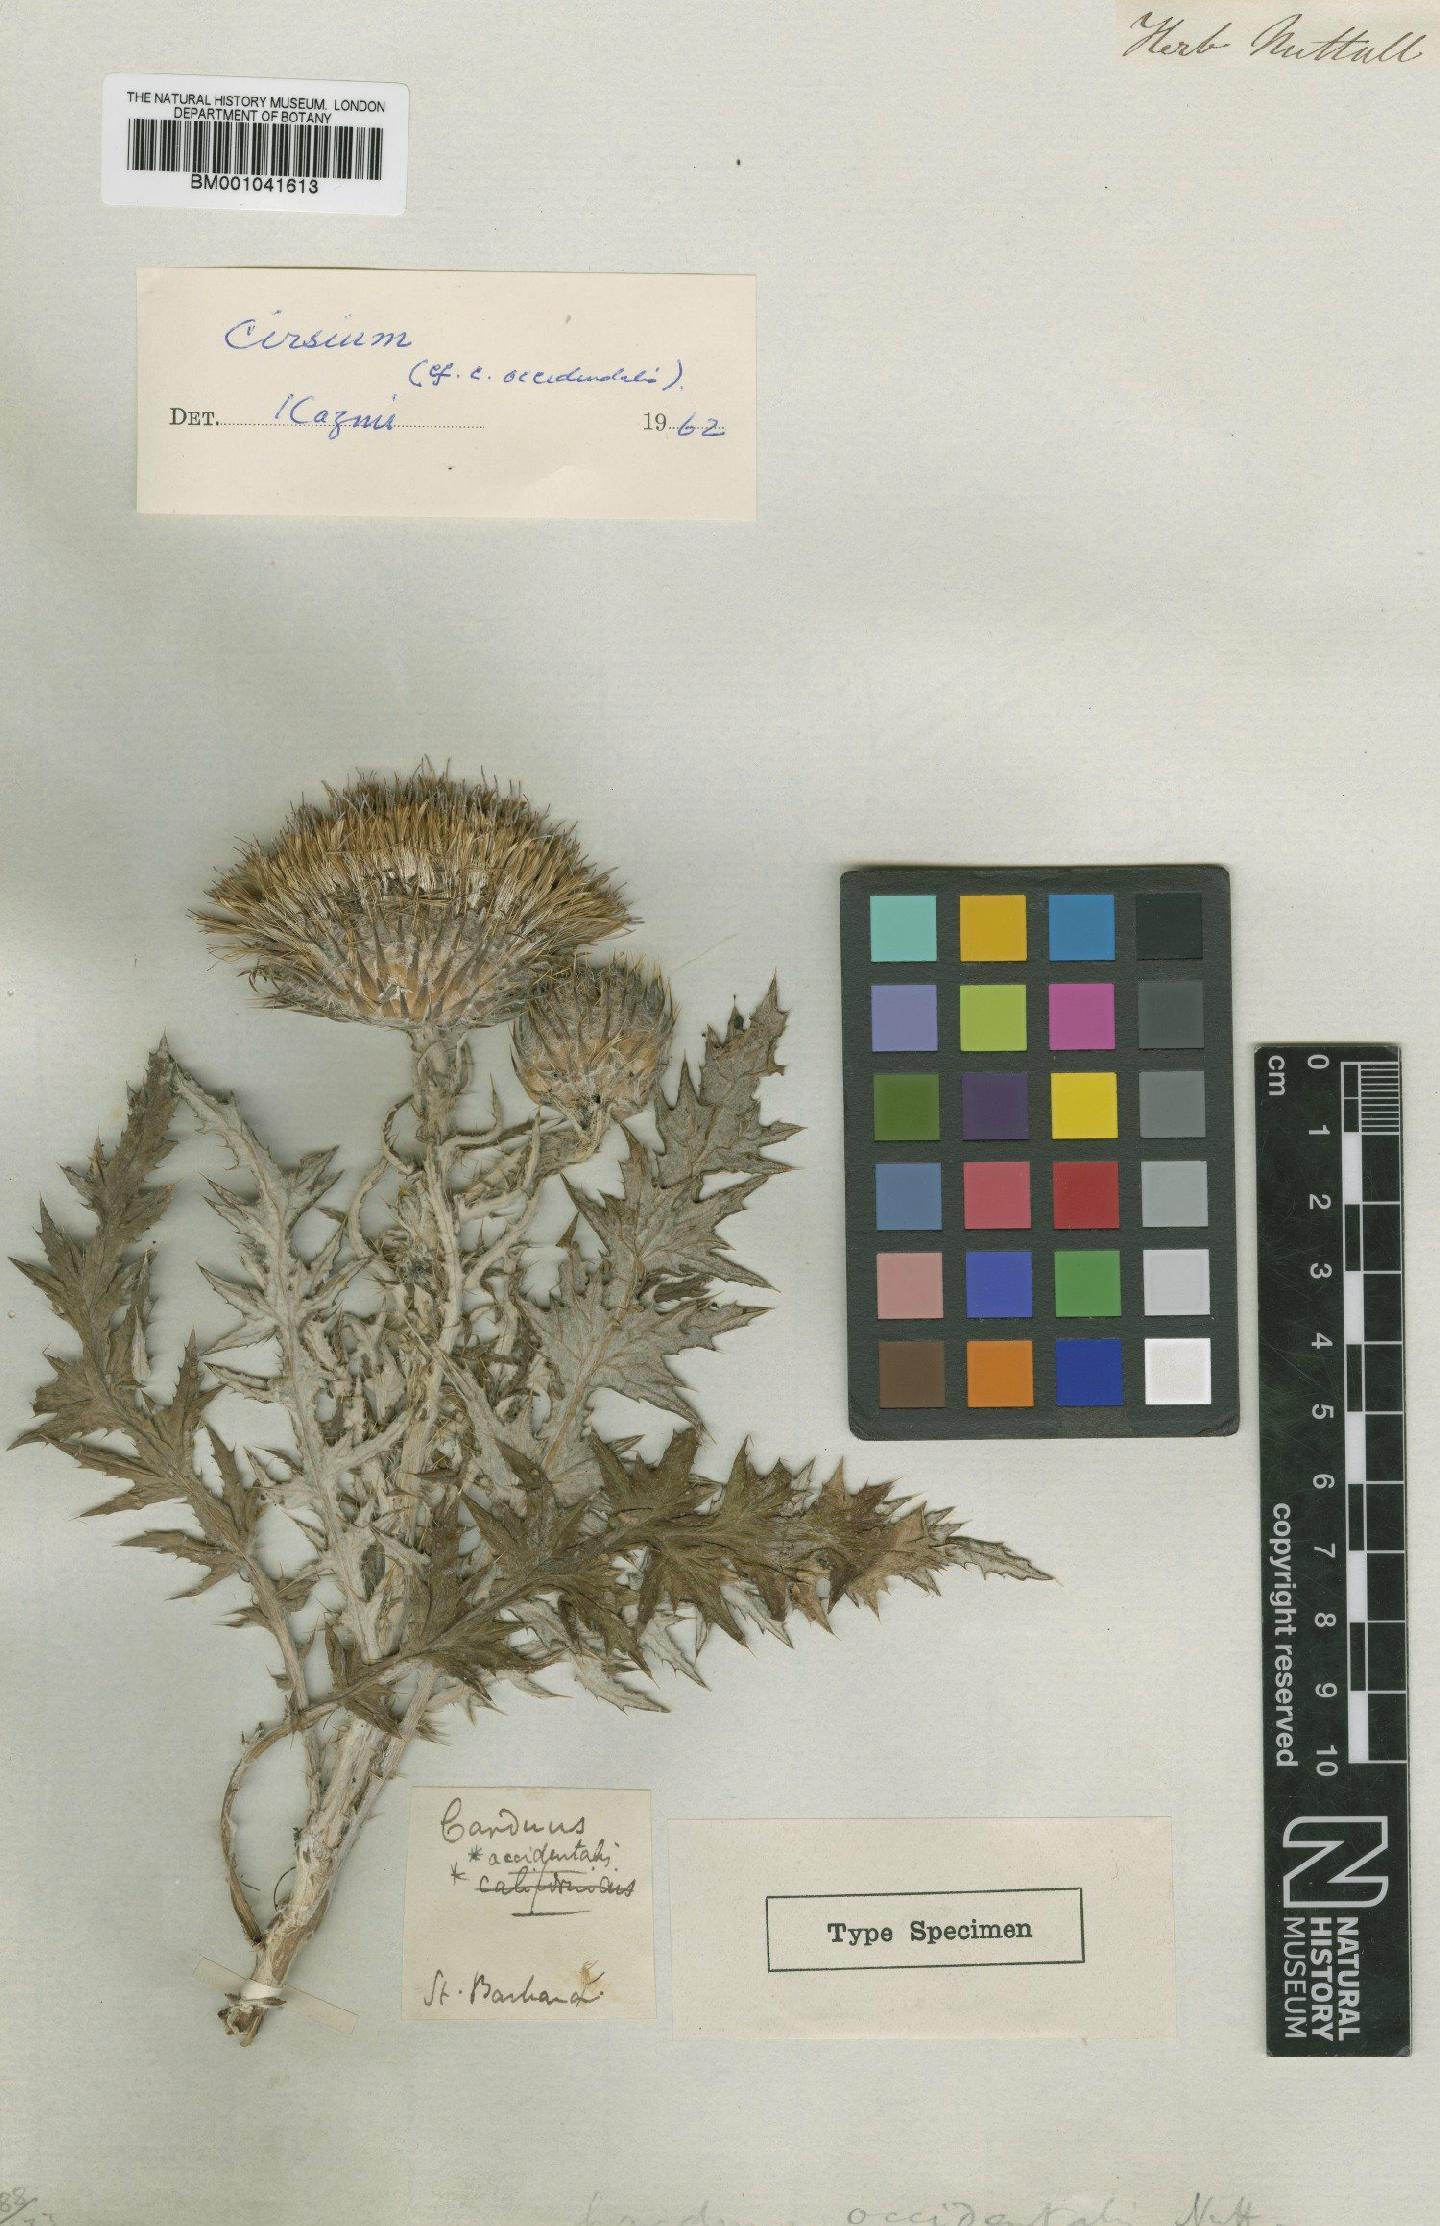 To NHMUK collection (Cirsium occidentale (Nutt.) Jeps.; Type; NHMUK:ecatalogue:1185299)